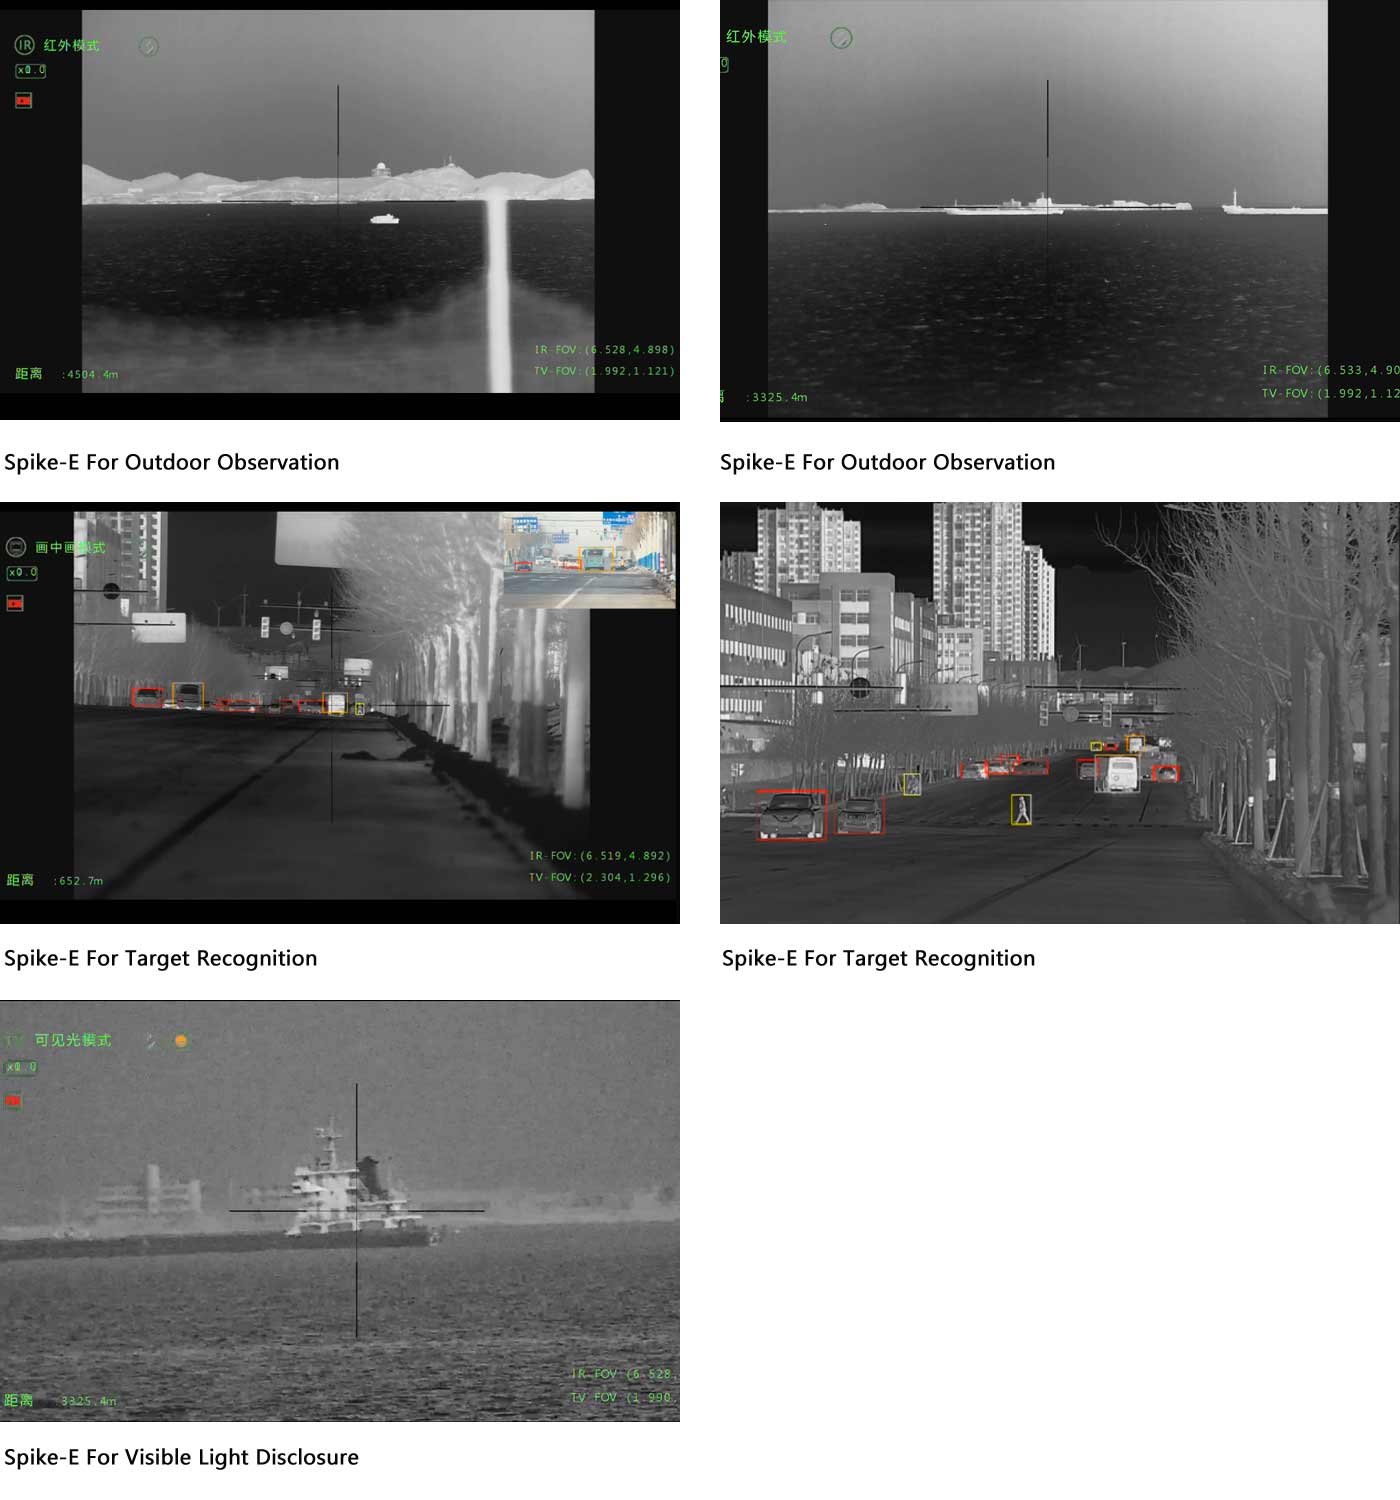 Spike-E On-board Photoelectric Thermal Imager Applications